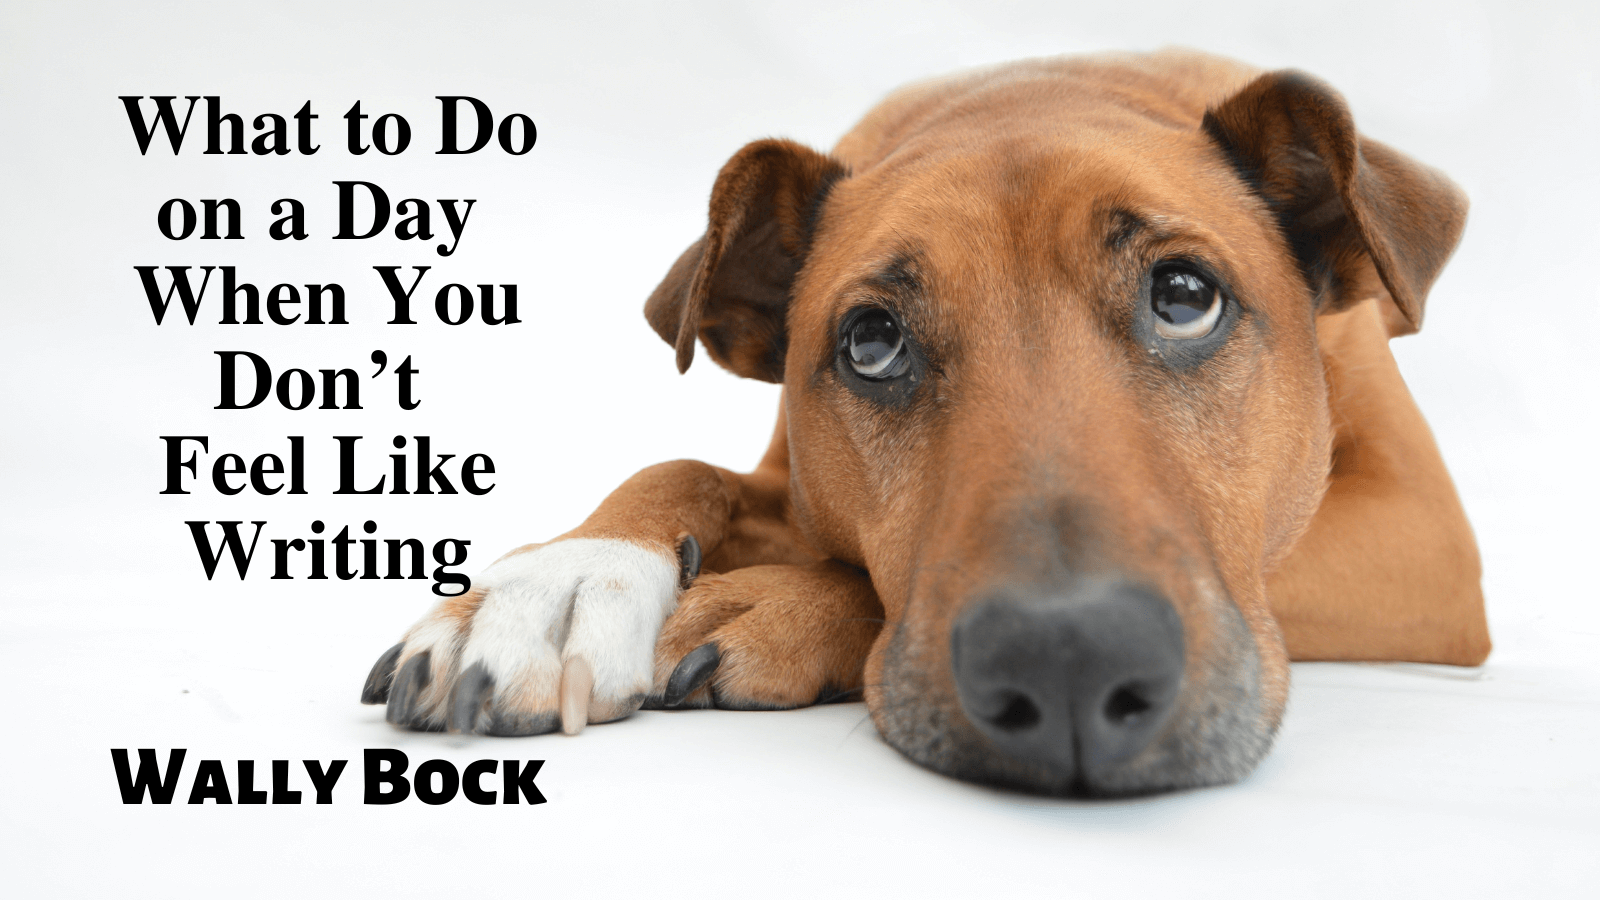 What to Do on a Day When You Don’t Feel Like Writing